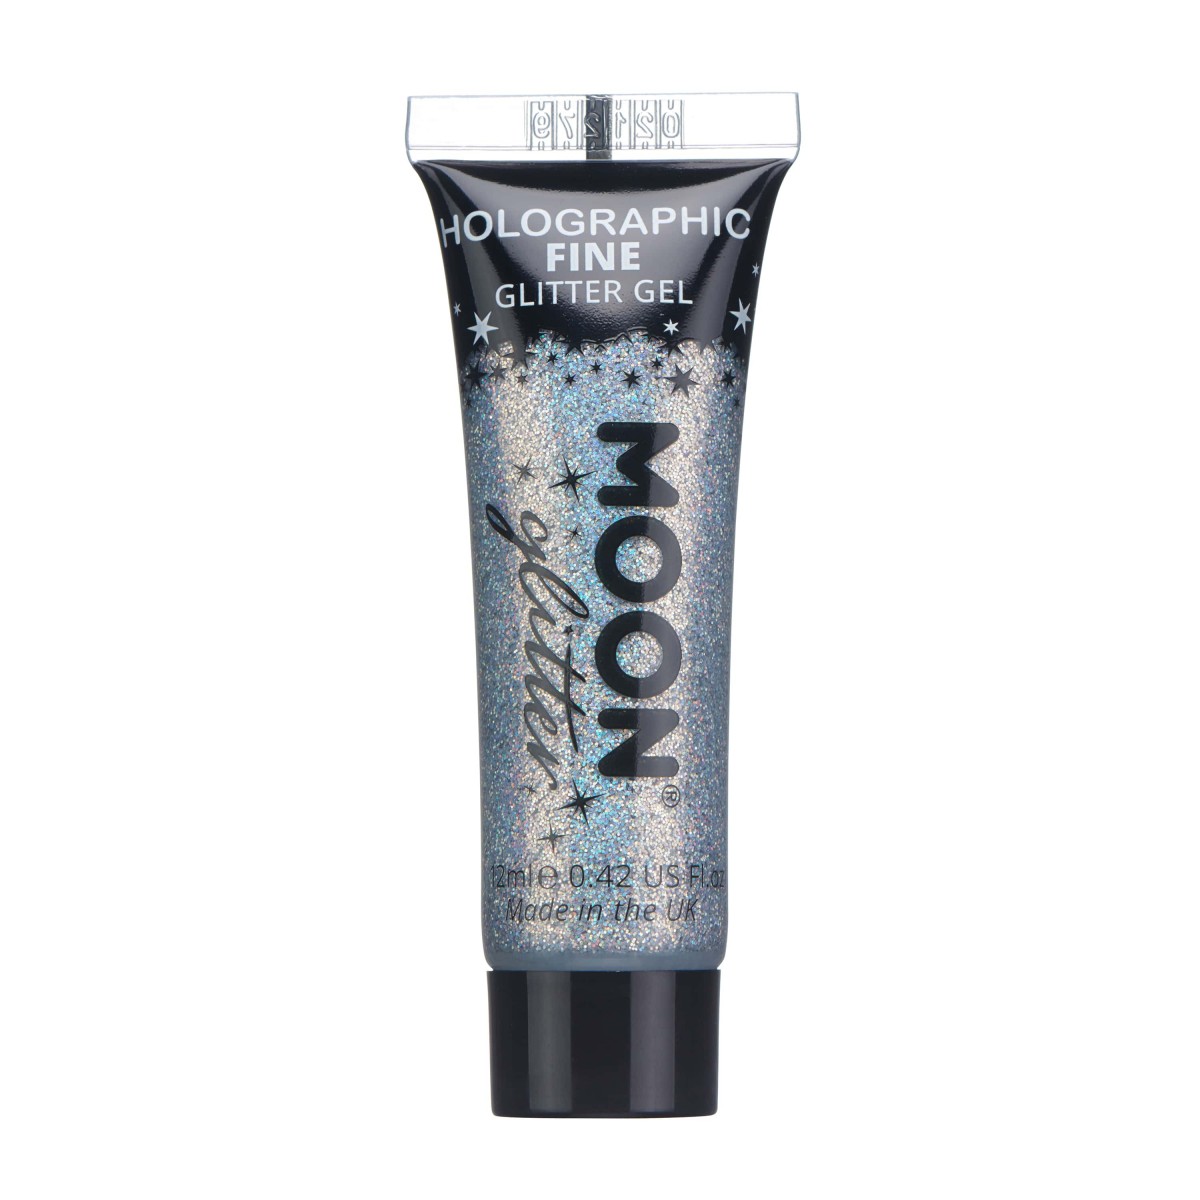 MOON CREATIONS G1 HOLOGRAPHIC FINE GLITTER GEL SILVER 12ml